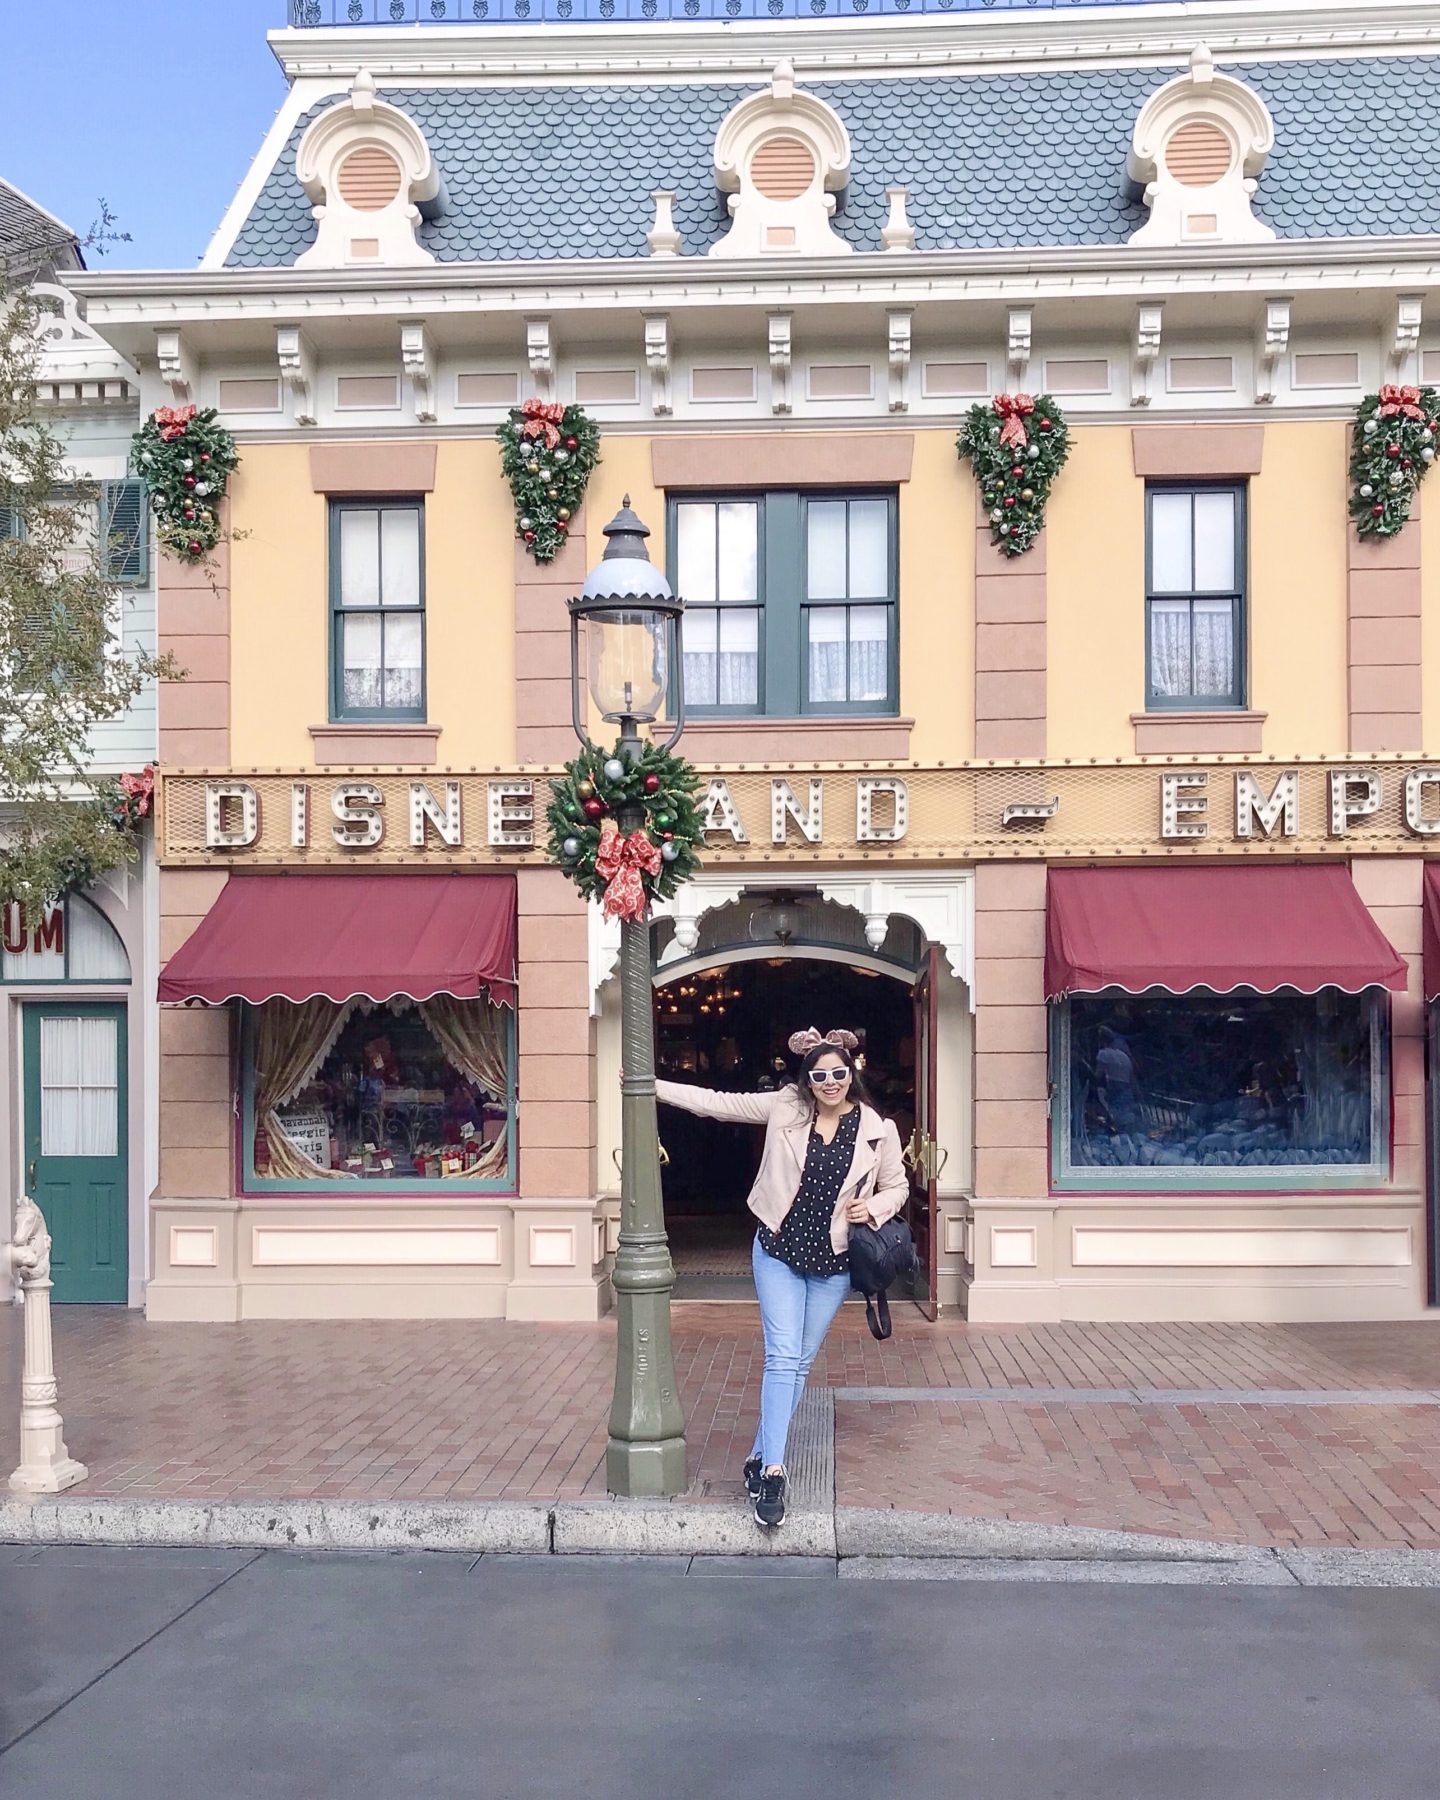 Holiday Time at Disneyland Outfit Ideas + 5 things you shouldn't